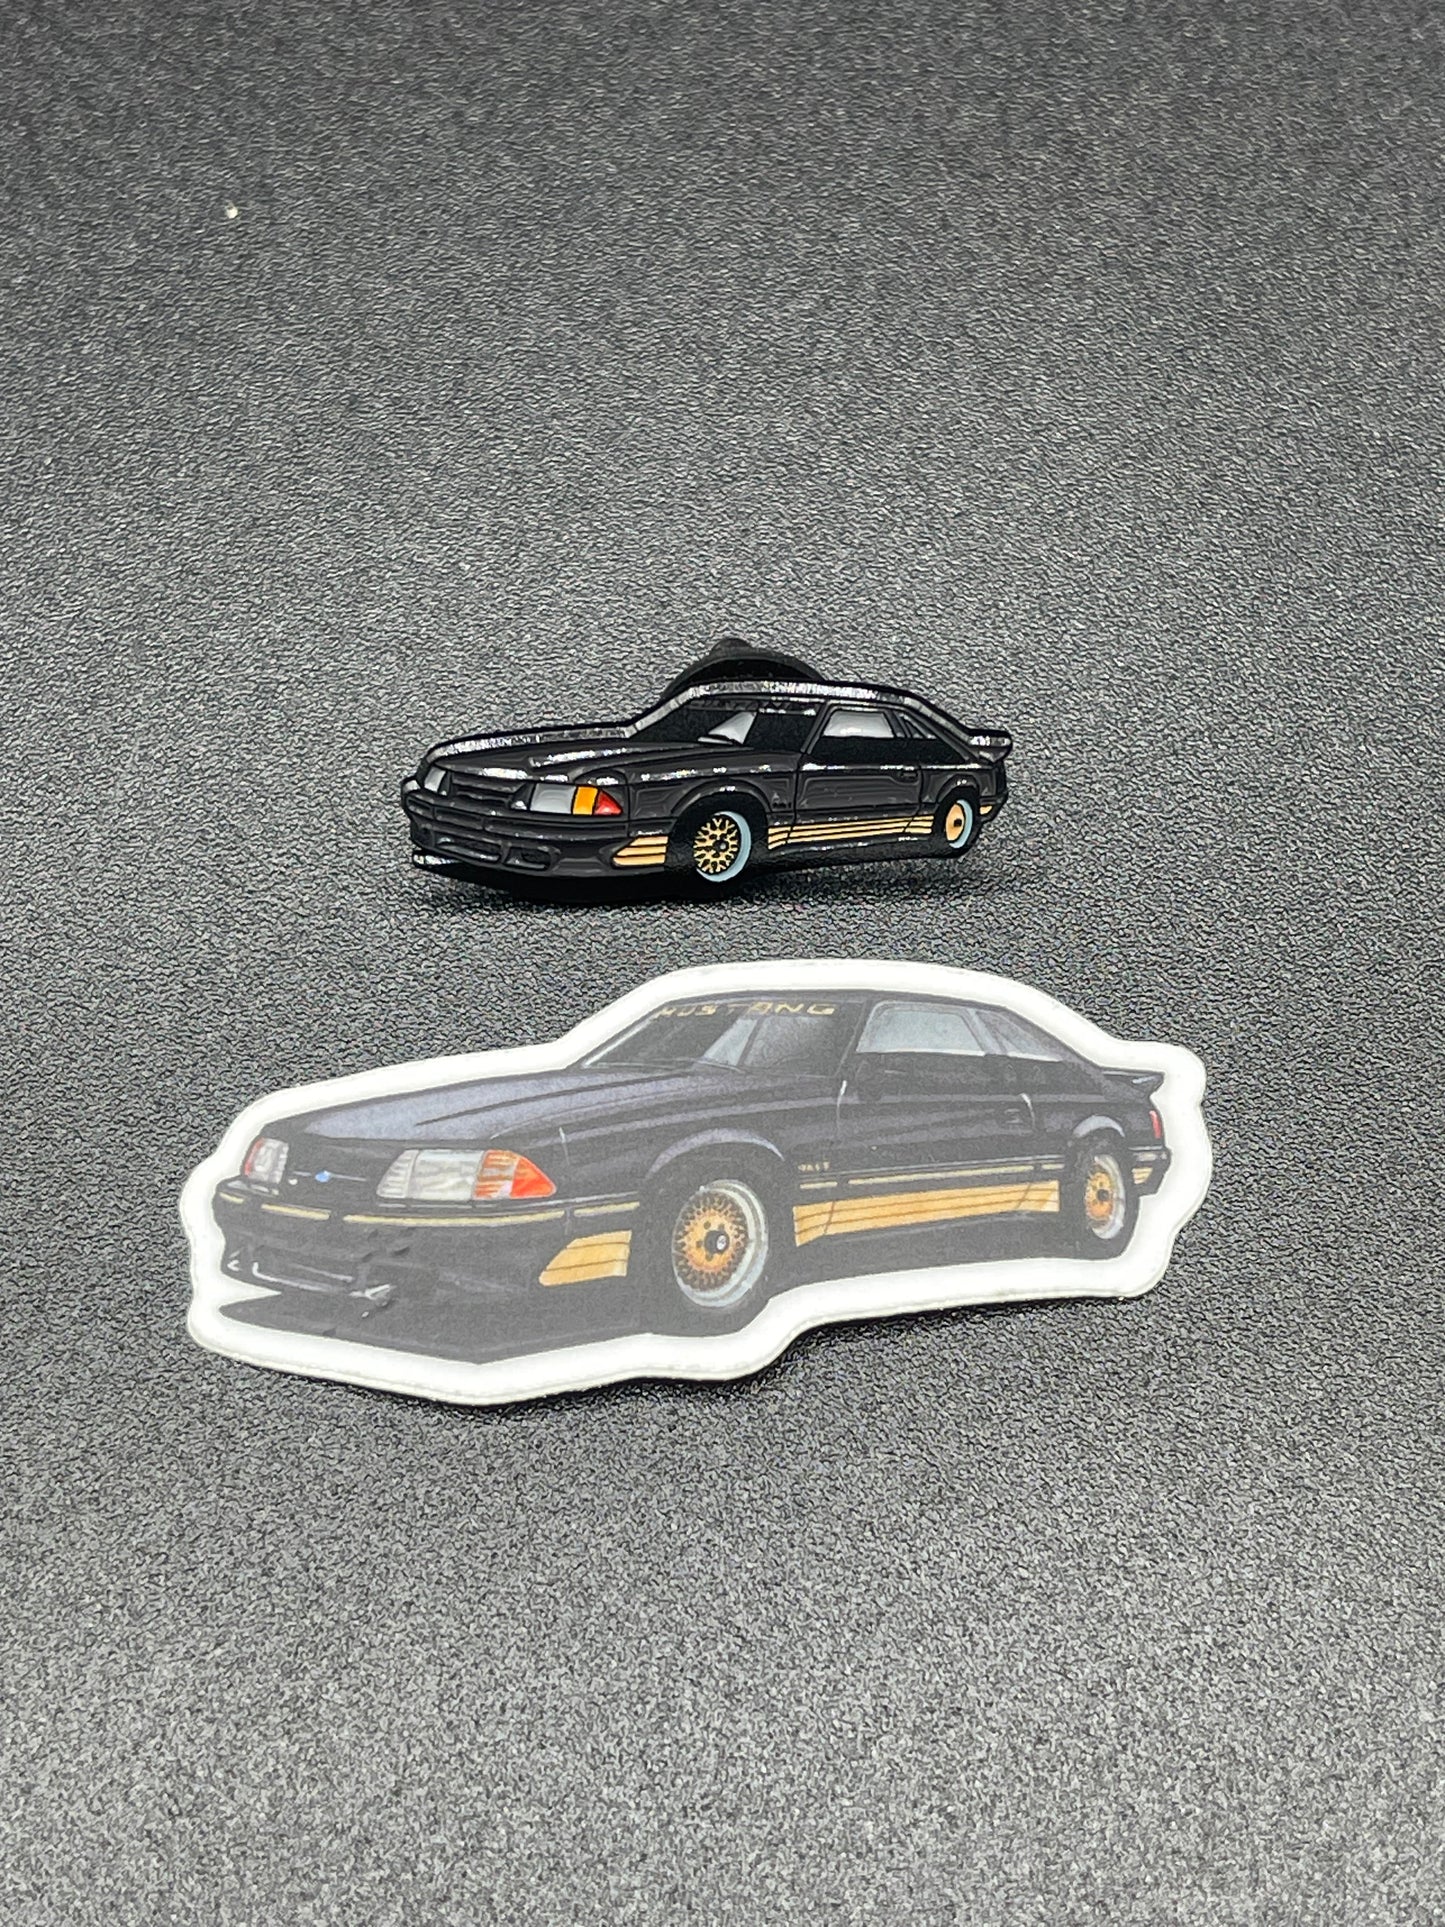 LP Diecast Garage 1988 Ford Mustang "SLN" Hat Pin and Sticker Diecast Metal *Your choice of color*